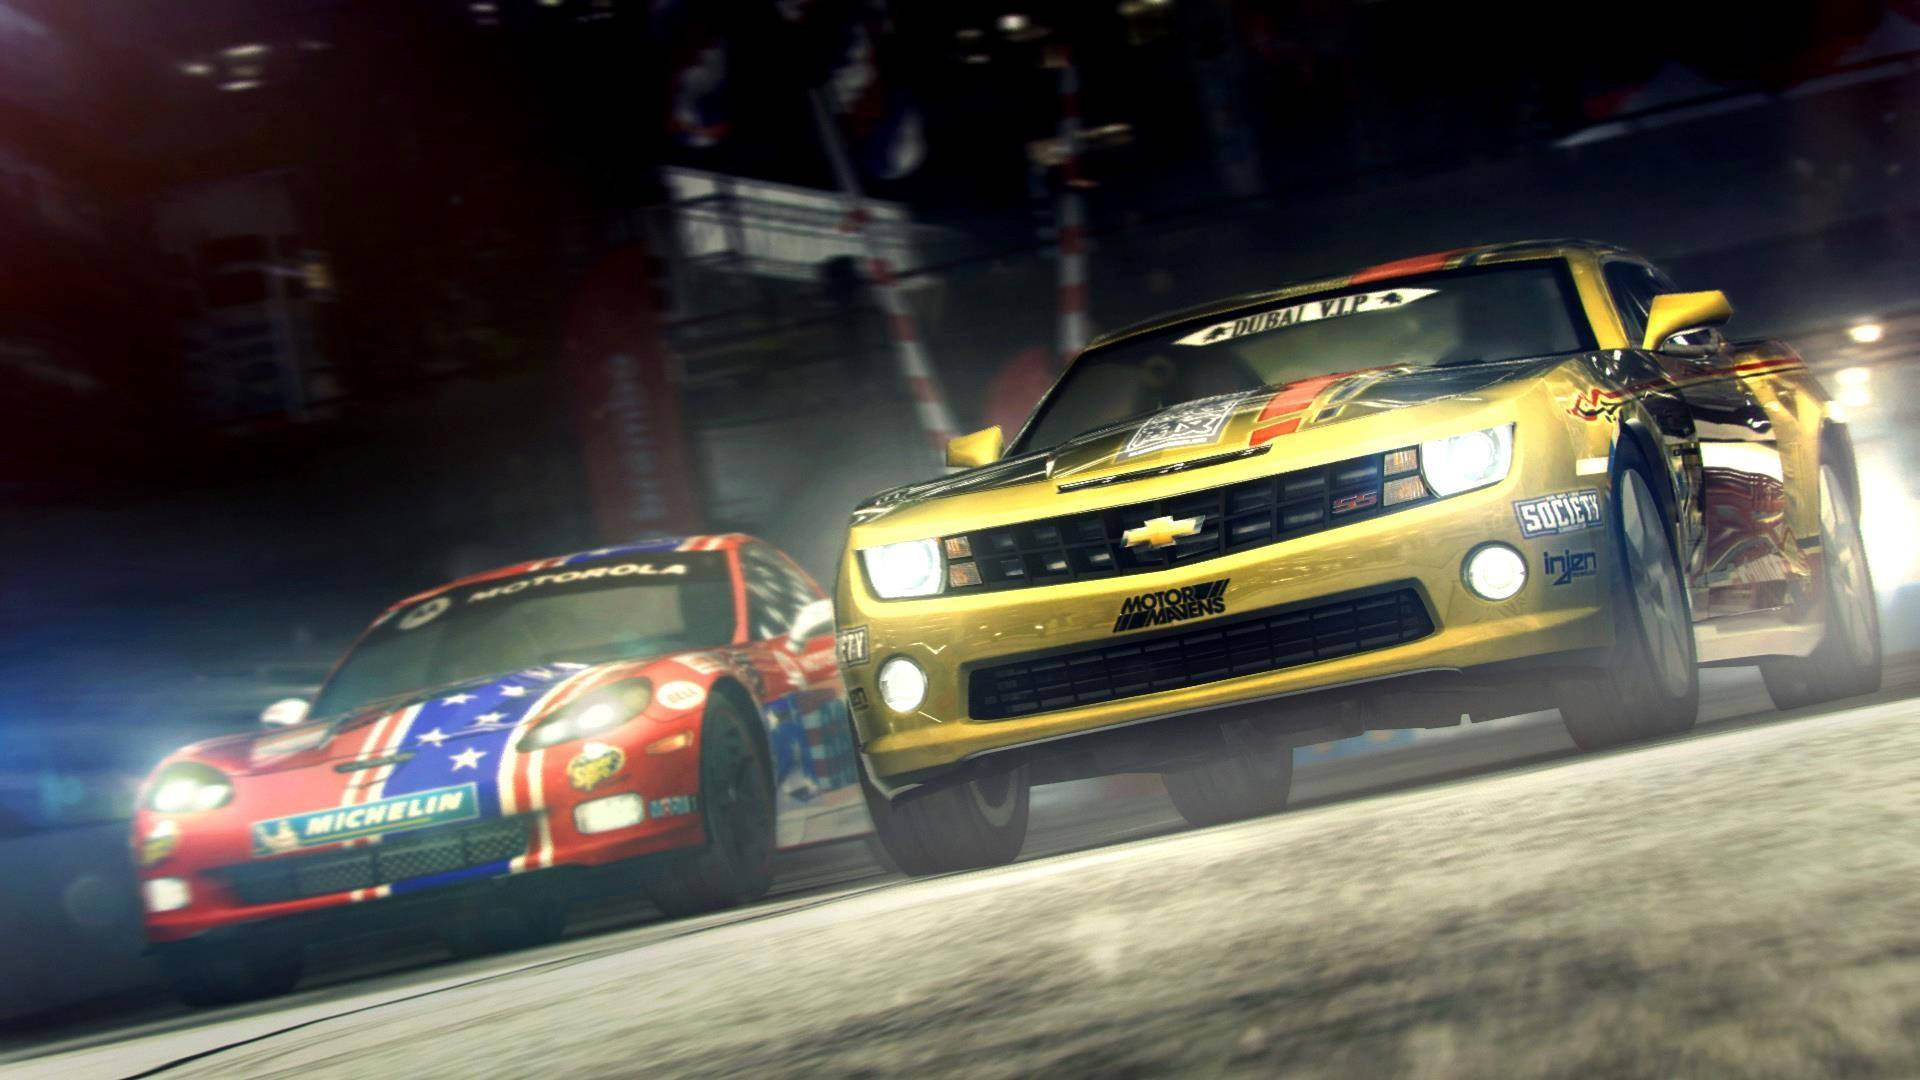 Exciting Grid 2 Racing Action Featuring Yellow and Red Cars Wallpaper